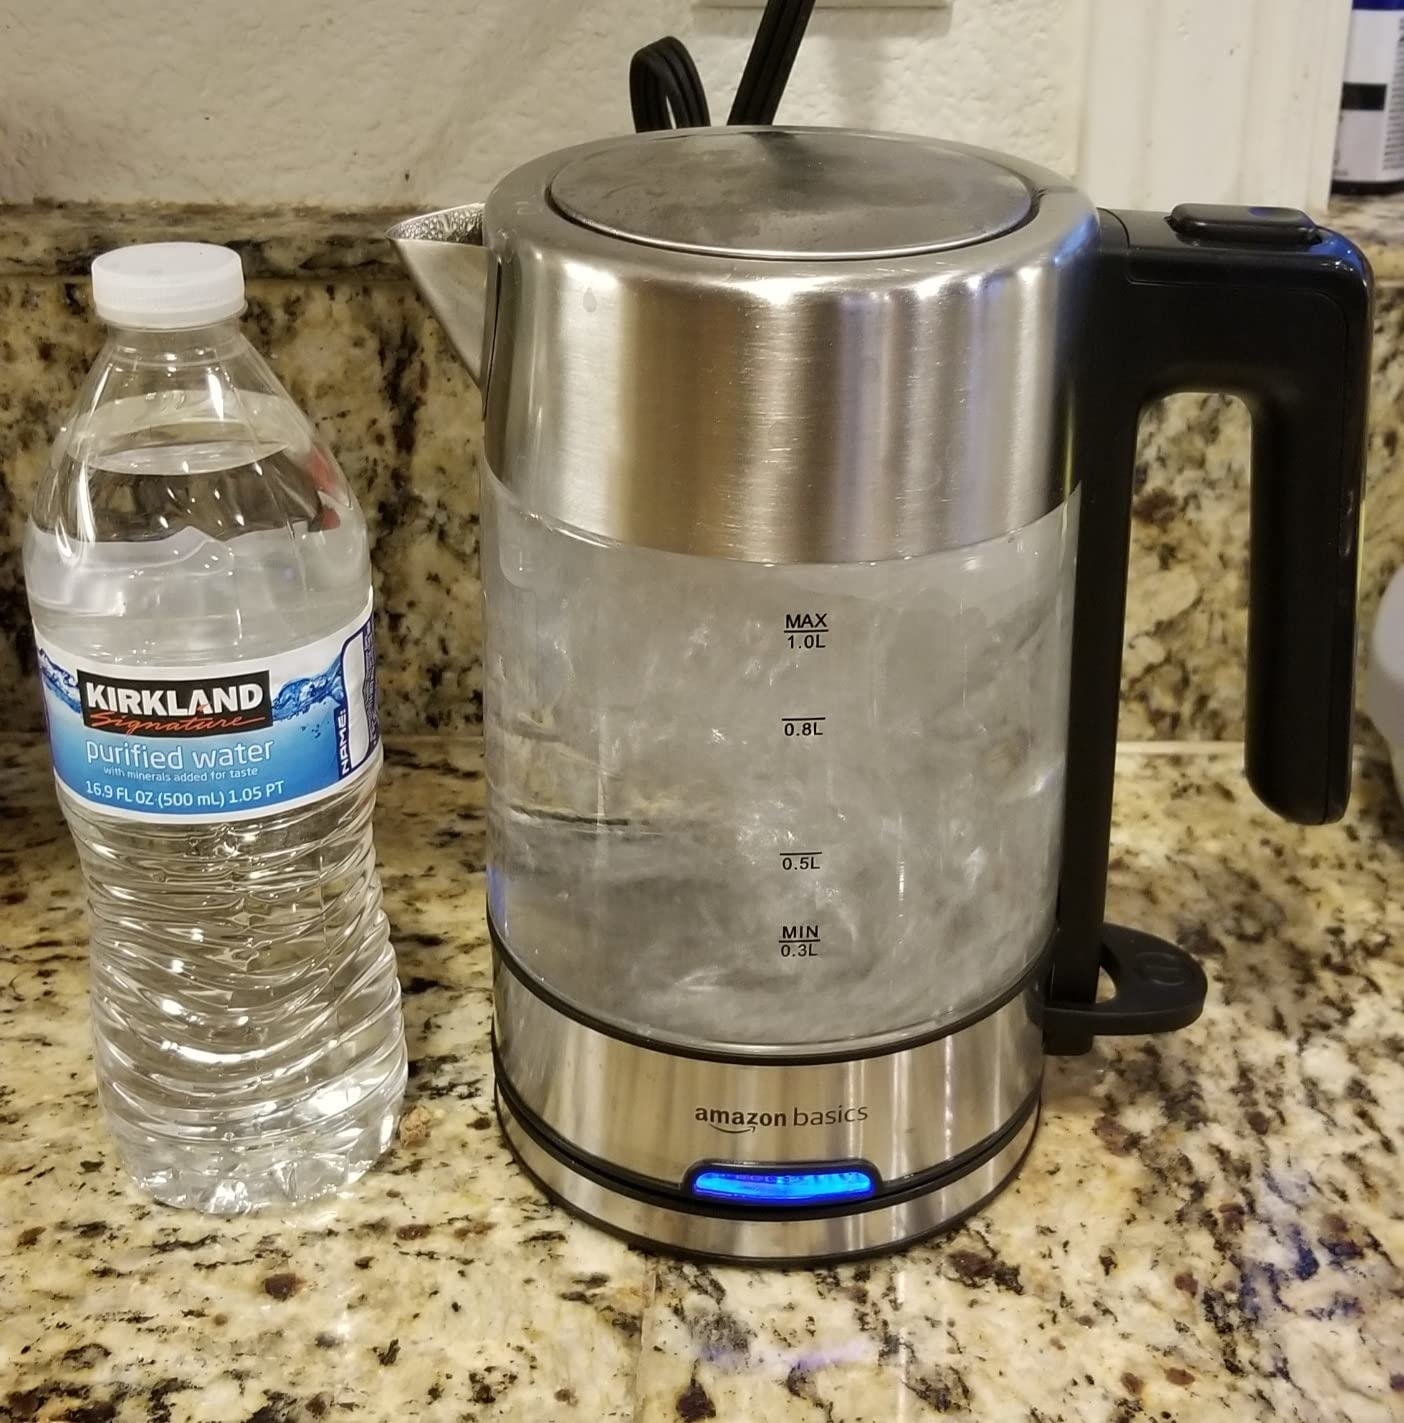 Reviewer image of the kettle on their counter with a water bottle next to it